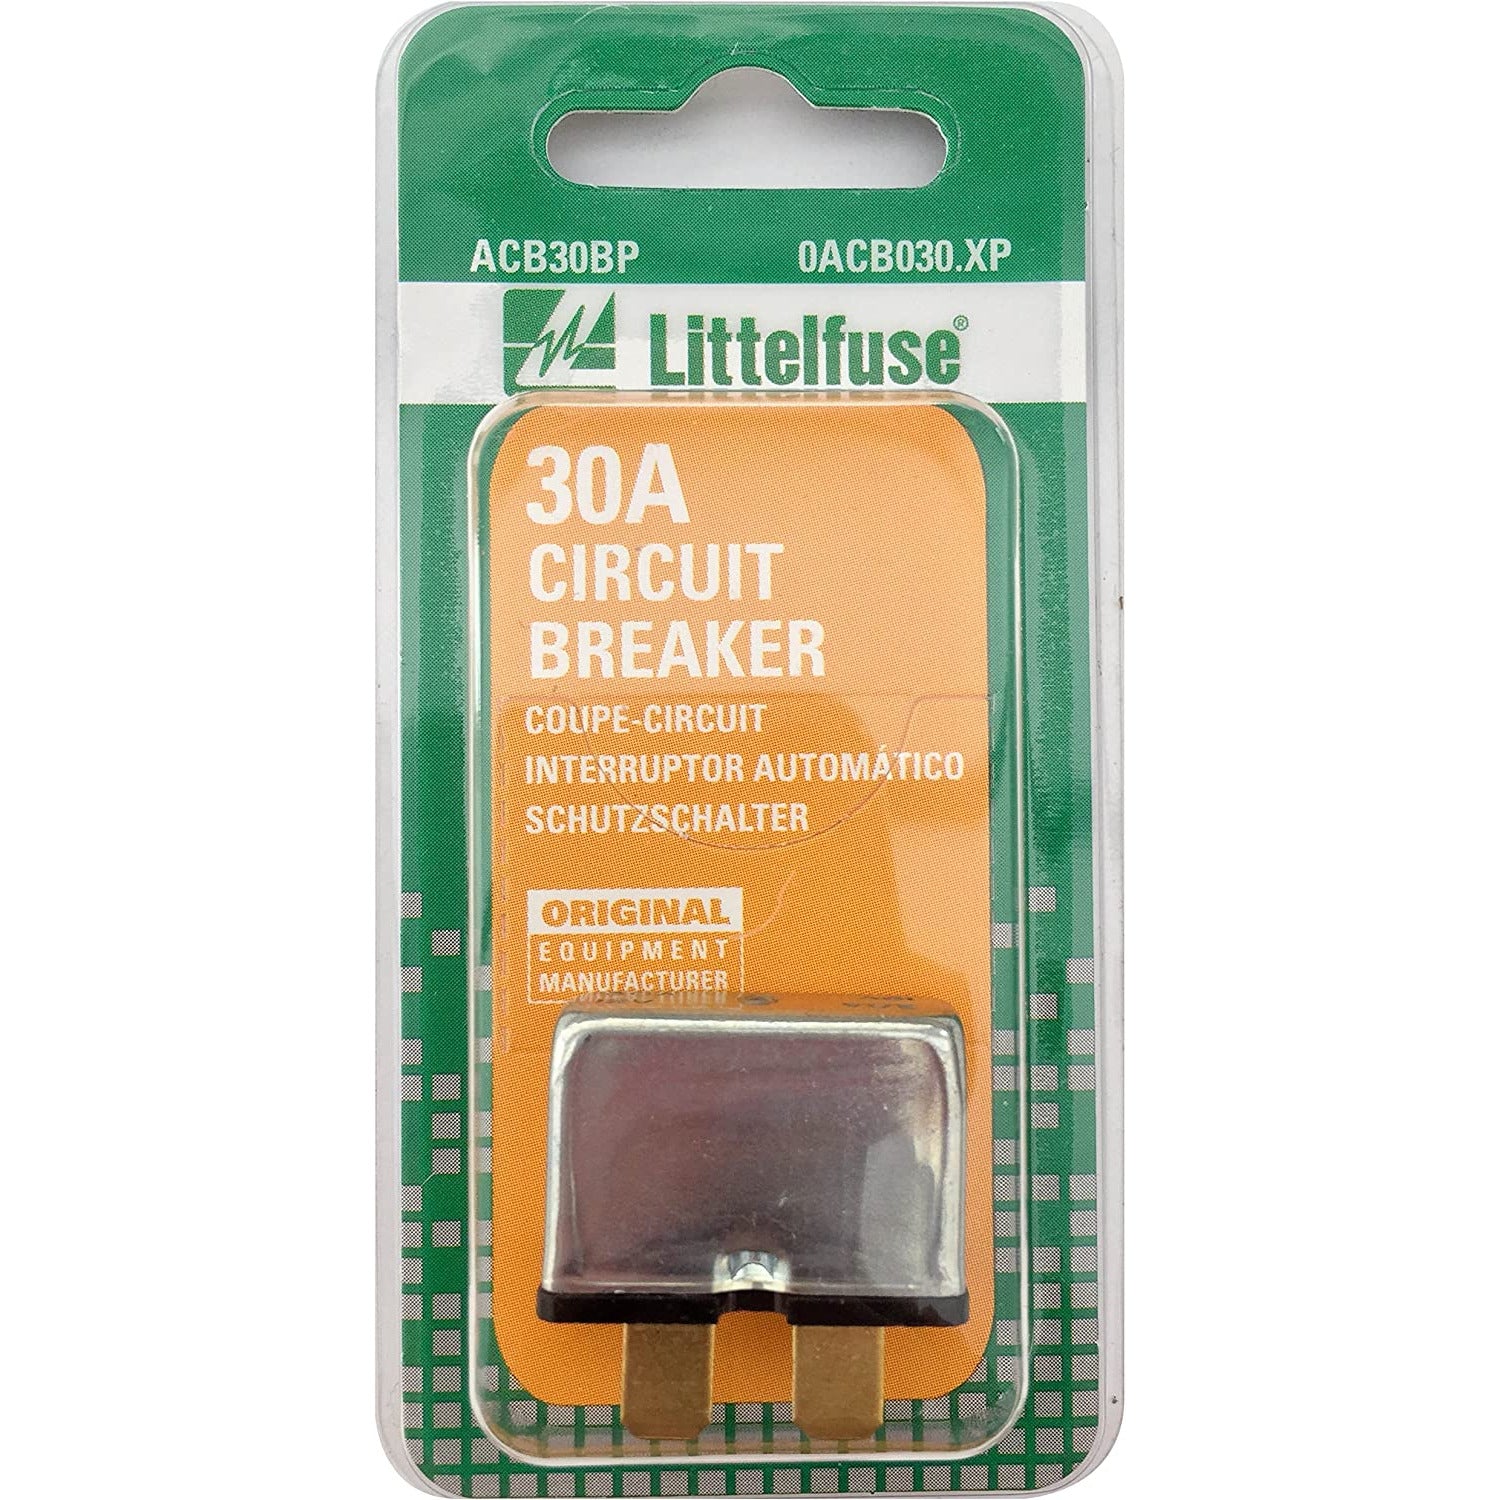 FUS 0ACB030.XP Littelfuse ATO Type Specialty Circuit Breaker (30A)